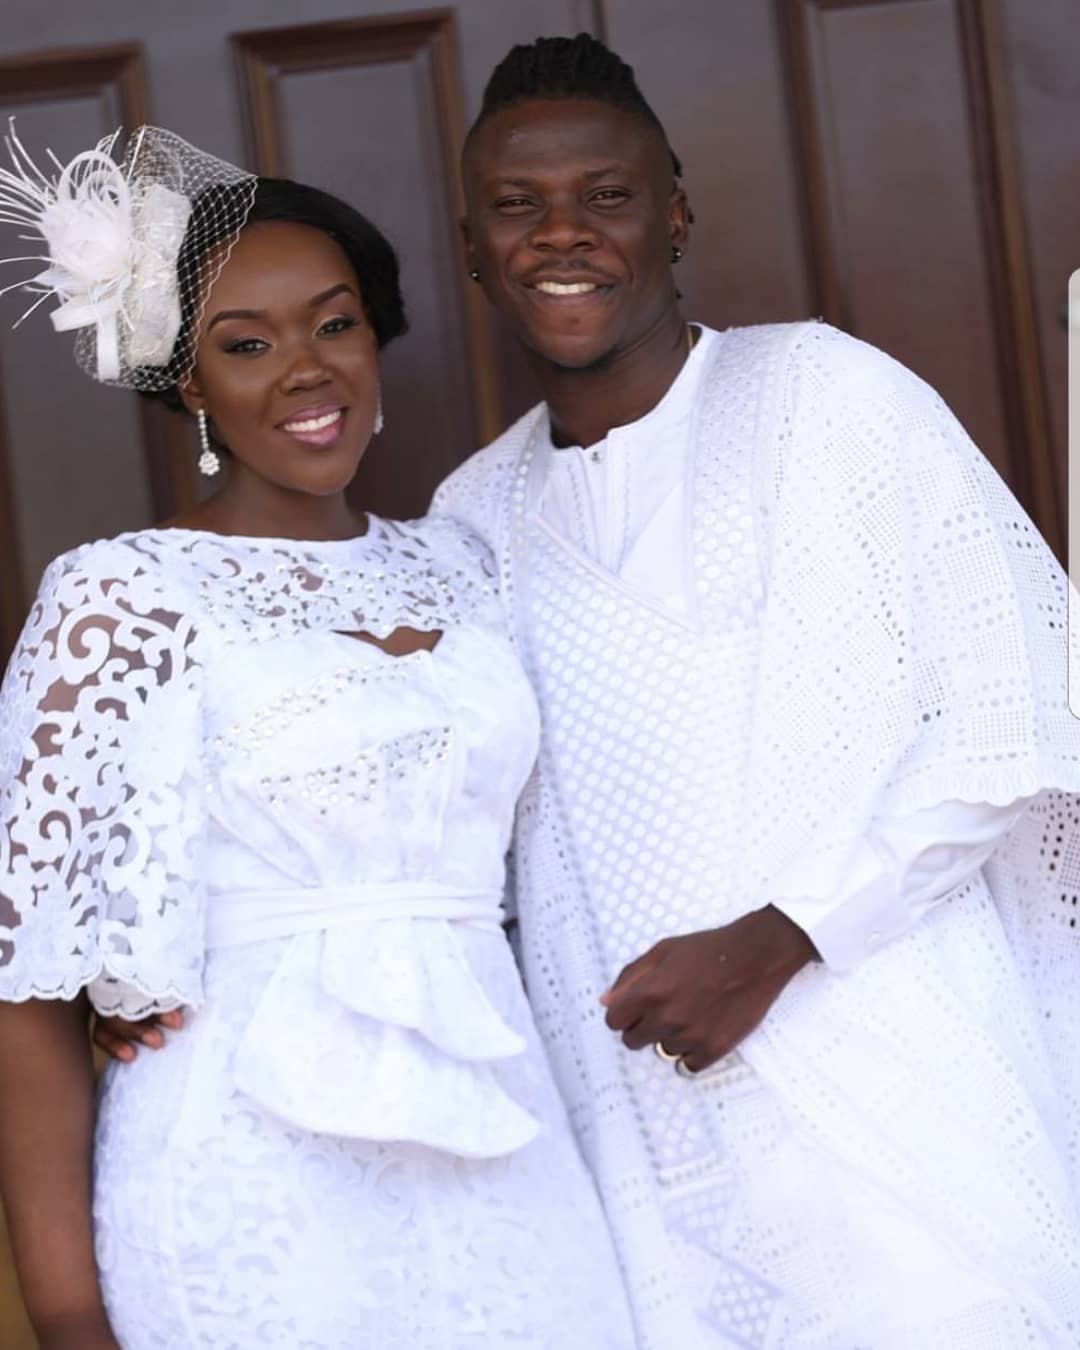 Photos: Stonebwoy Christens Daughter, Names Her After His Mother